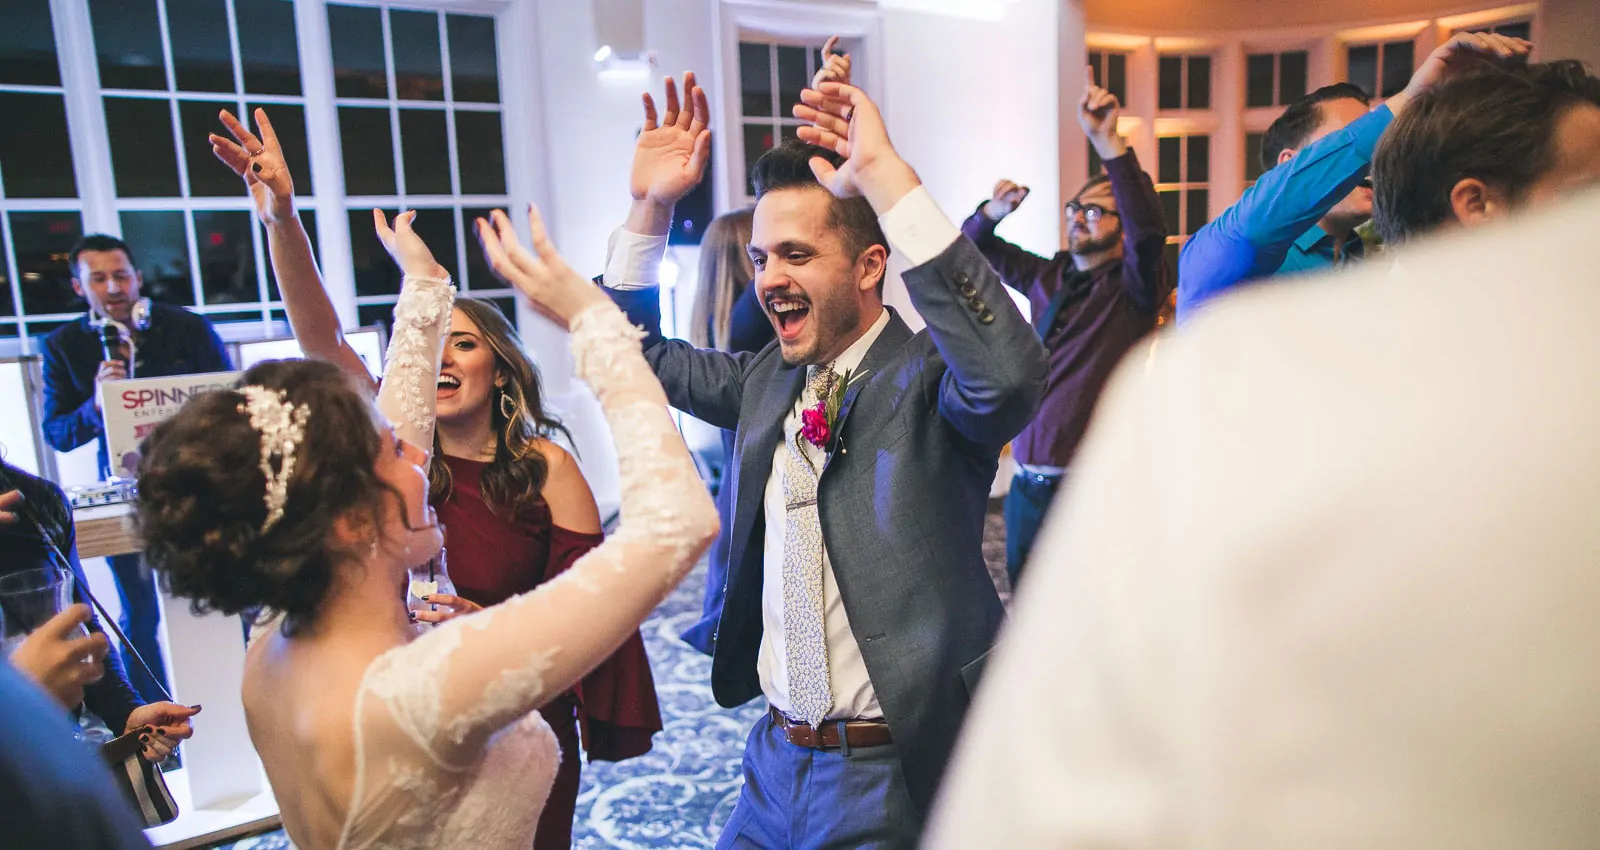 5 Secrets to Keeping People On The Dance Floor At Your Wedding